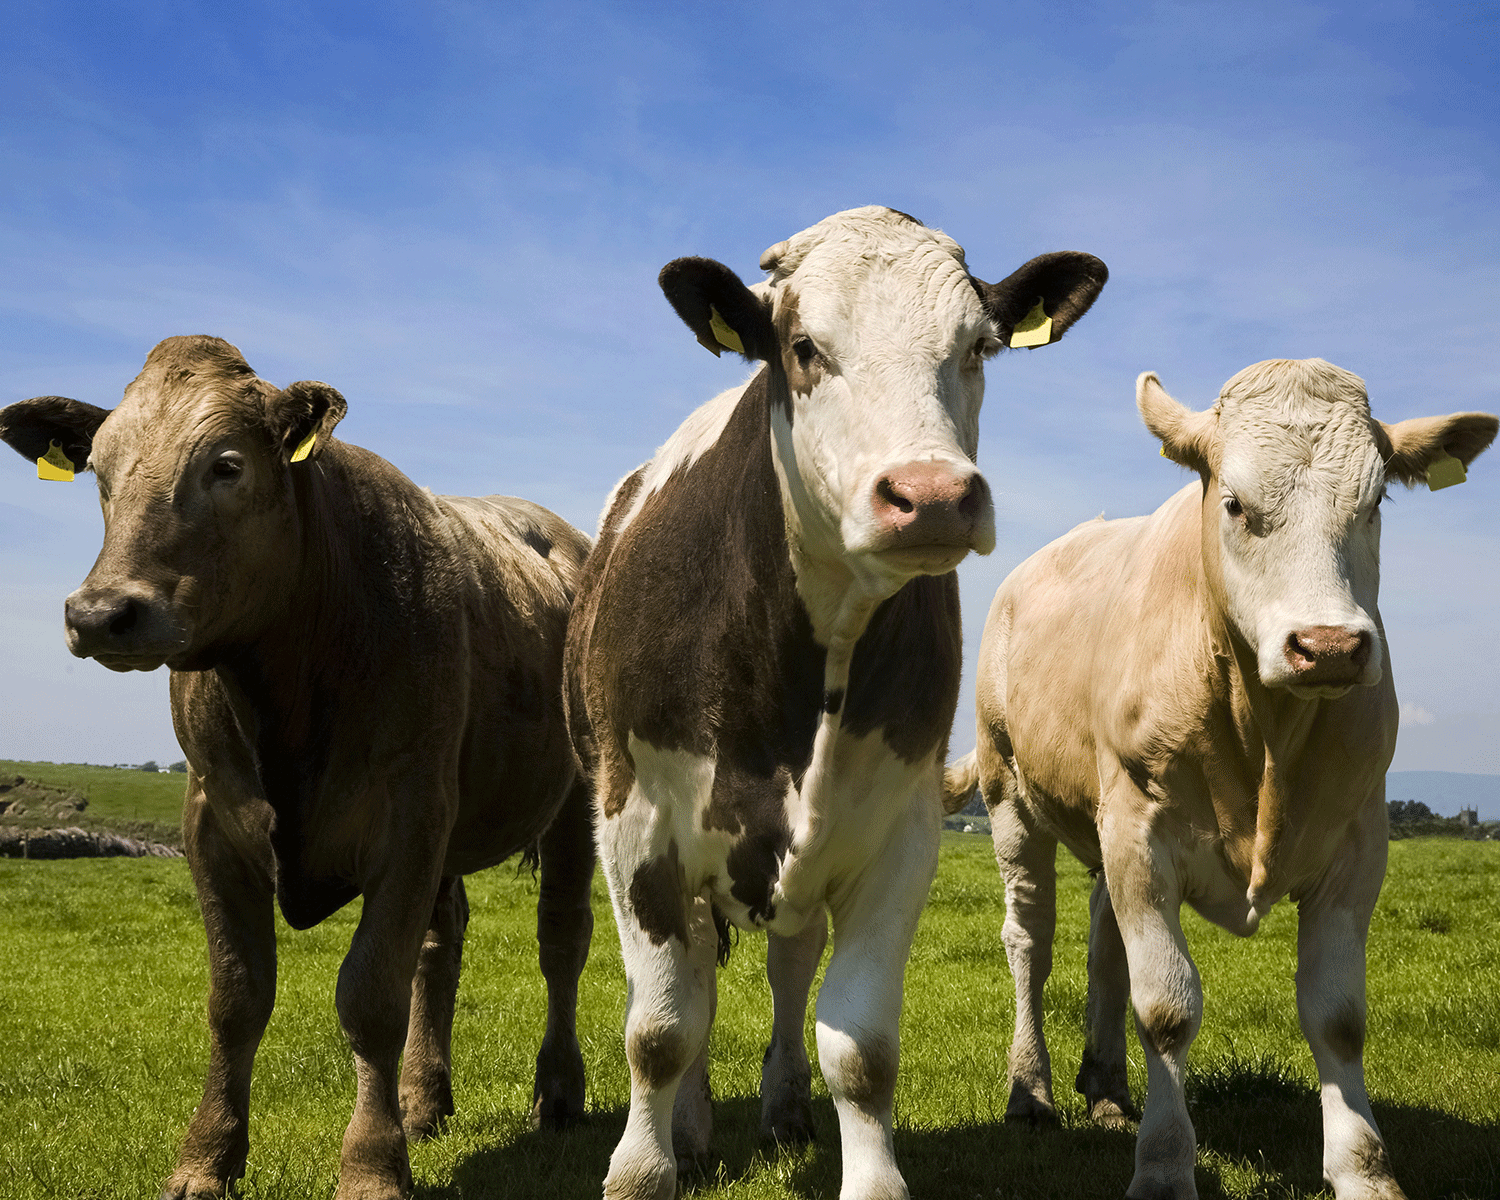 Farmers oppose bestiality bill against sex acts with animals in New Hampshire The Independent The Independent pic pic